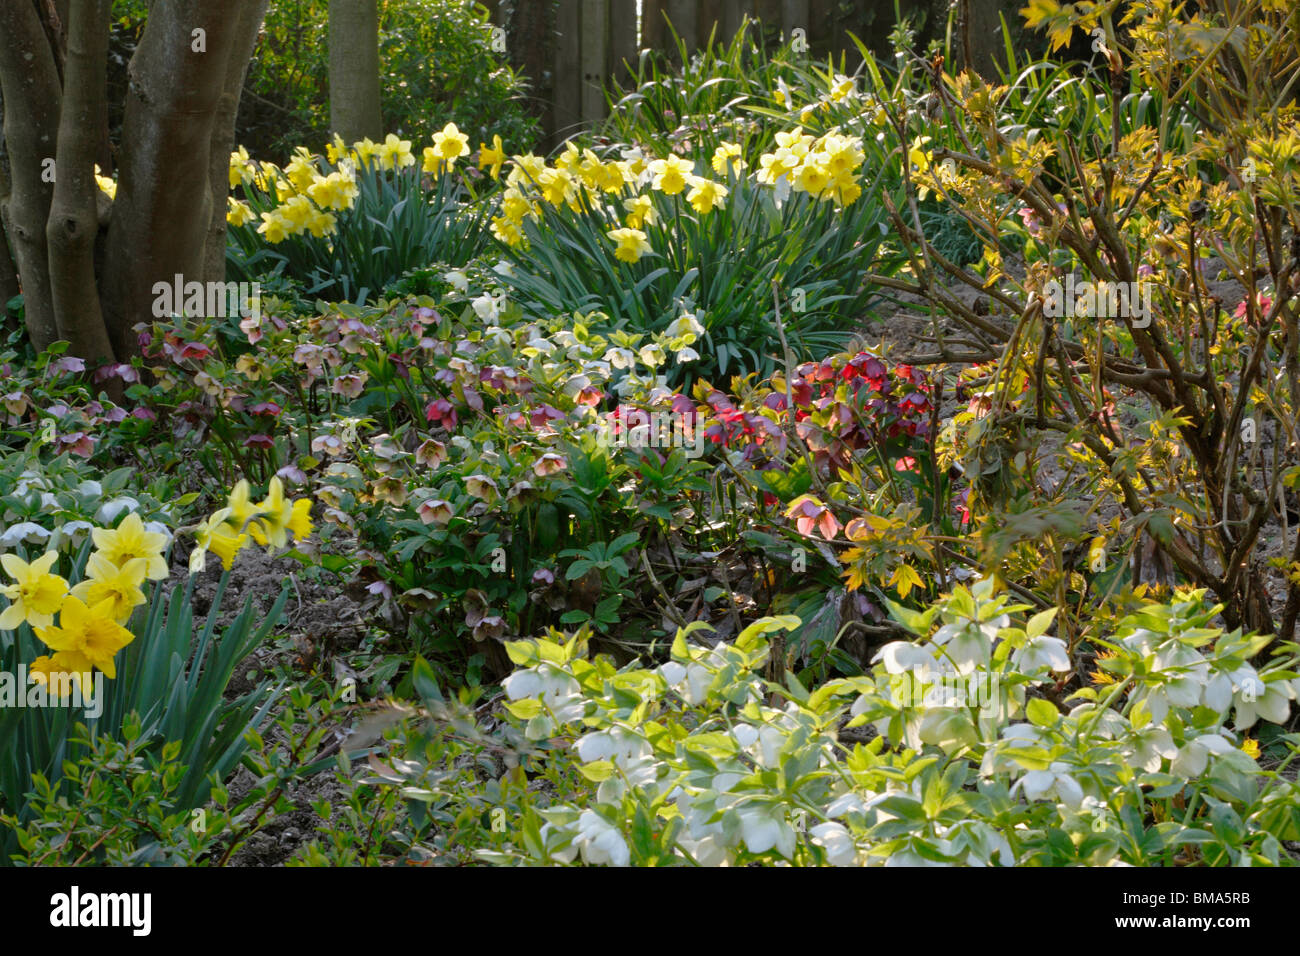 Highdown Gardens, Worthing, West Sussex, garden with spring and sumer flowering trees and shrubs, as well as flowering bulbs Stock Photo